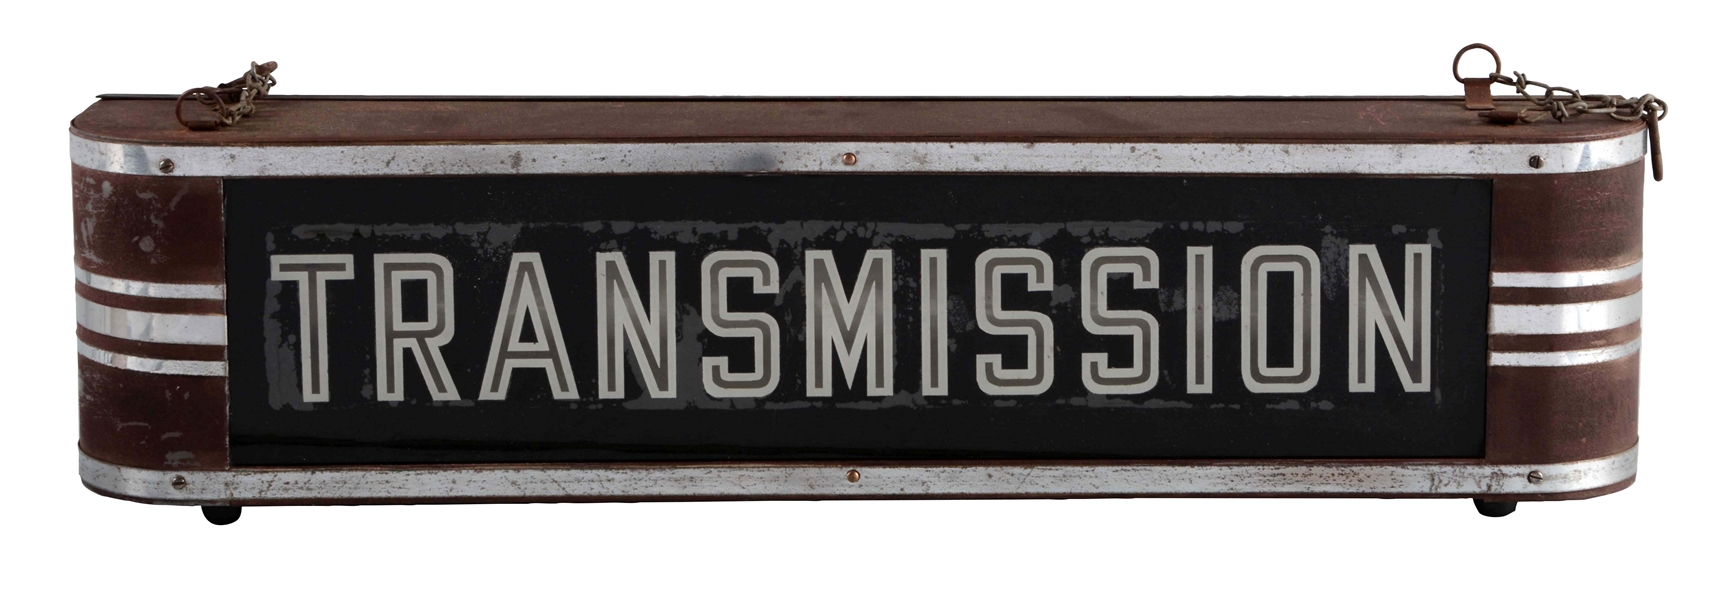 TRANSMISSION SERVICE REVERSE GLASS LIGHT UP SIGN IN METAL DISPLAY.